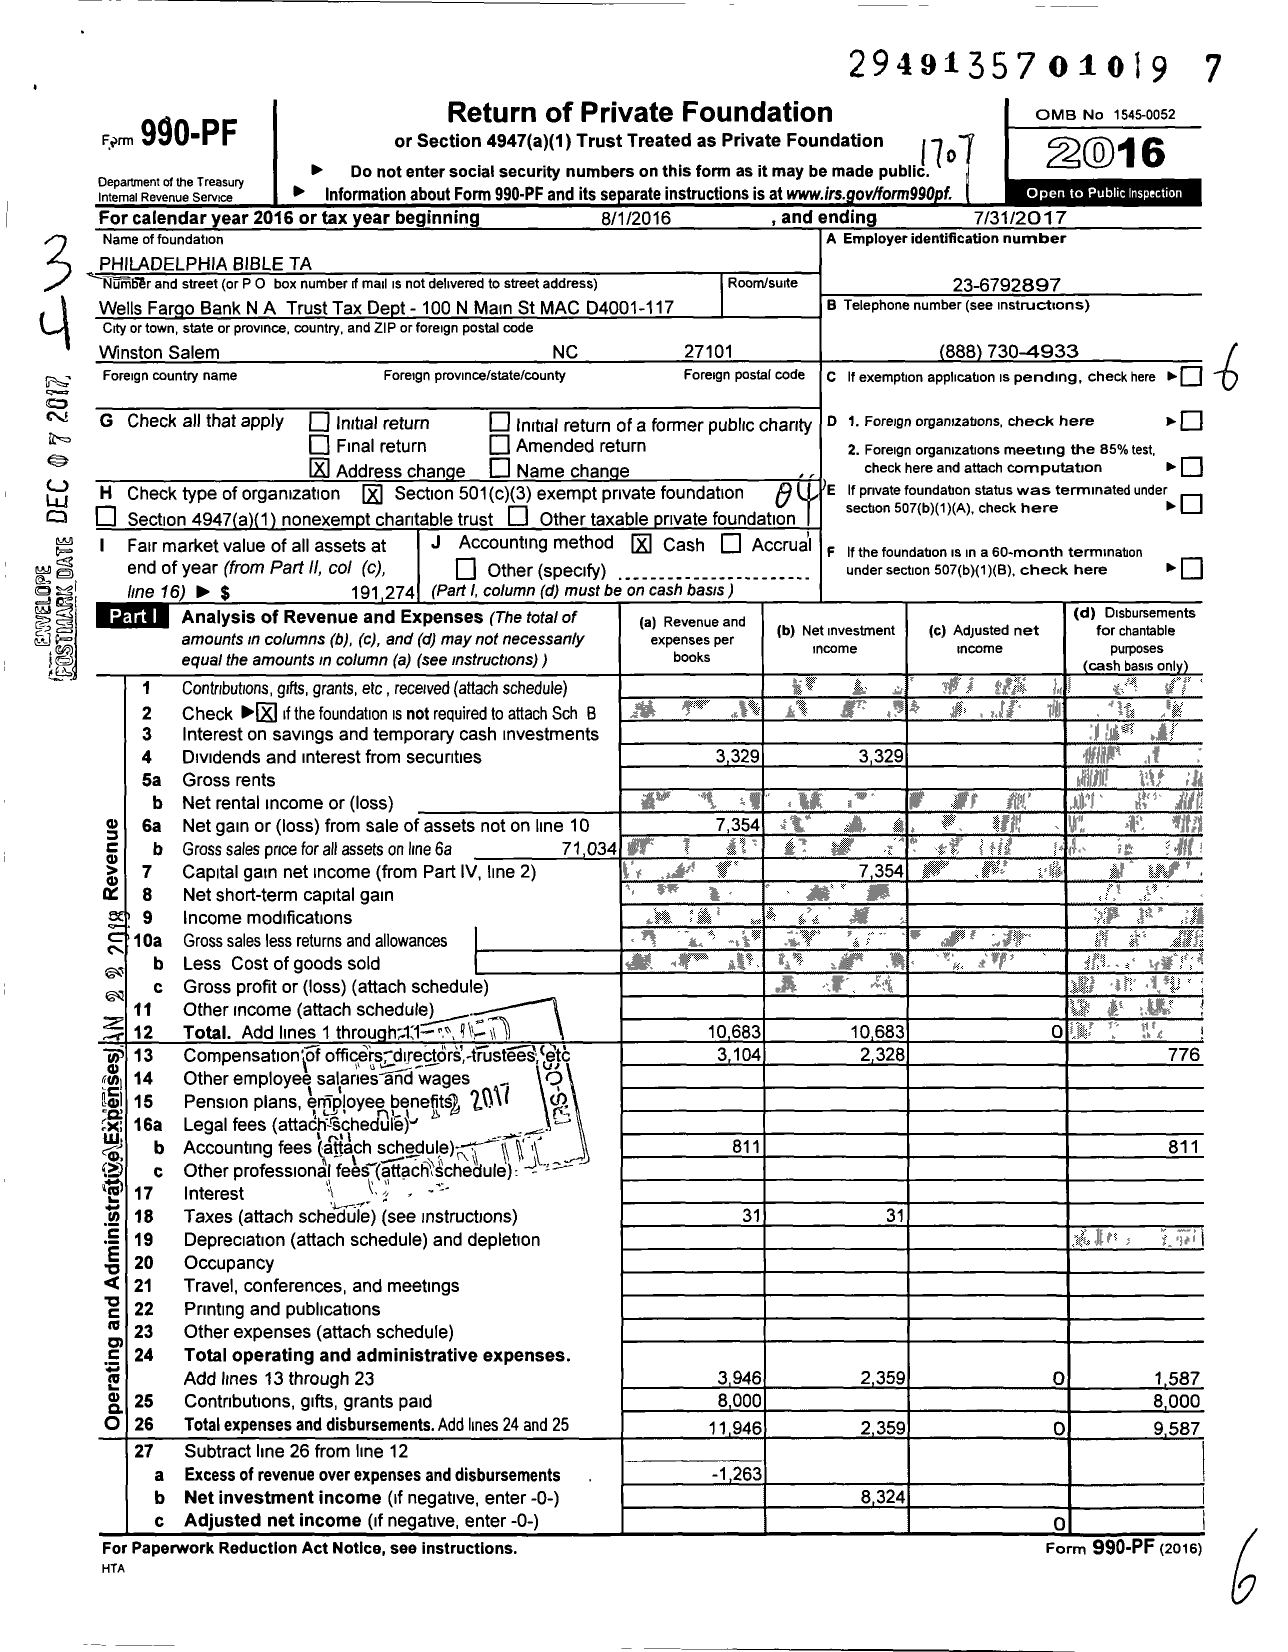 Image of first page of 2016 Form 990PF for Philadelphia Bible Ta